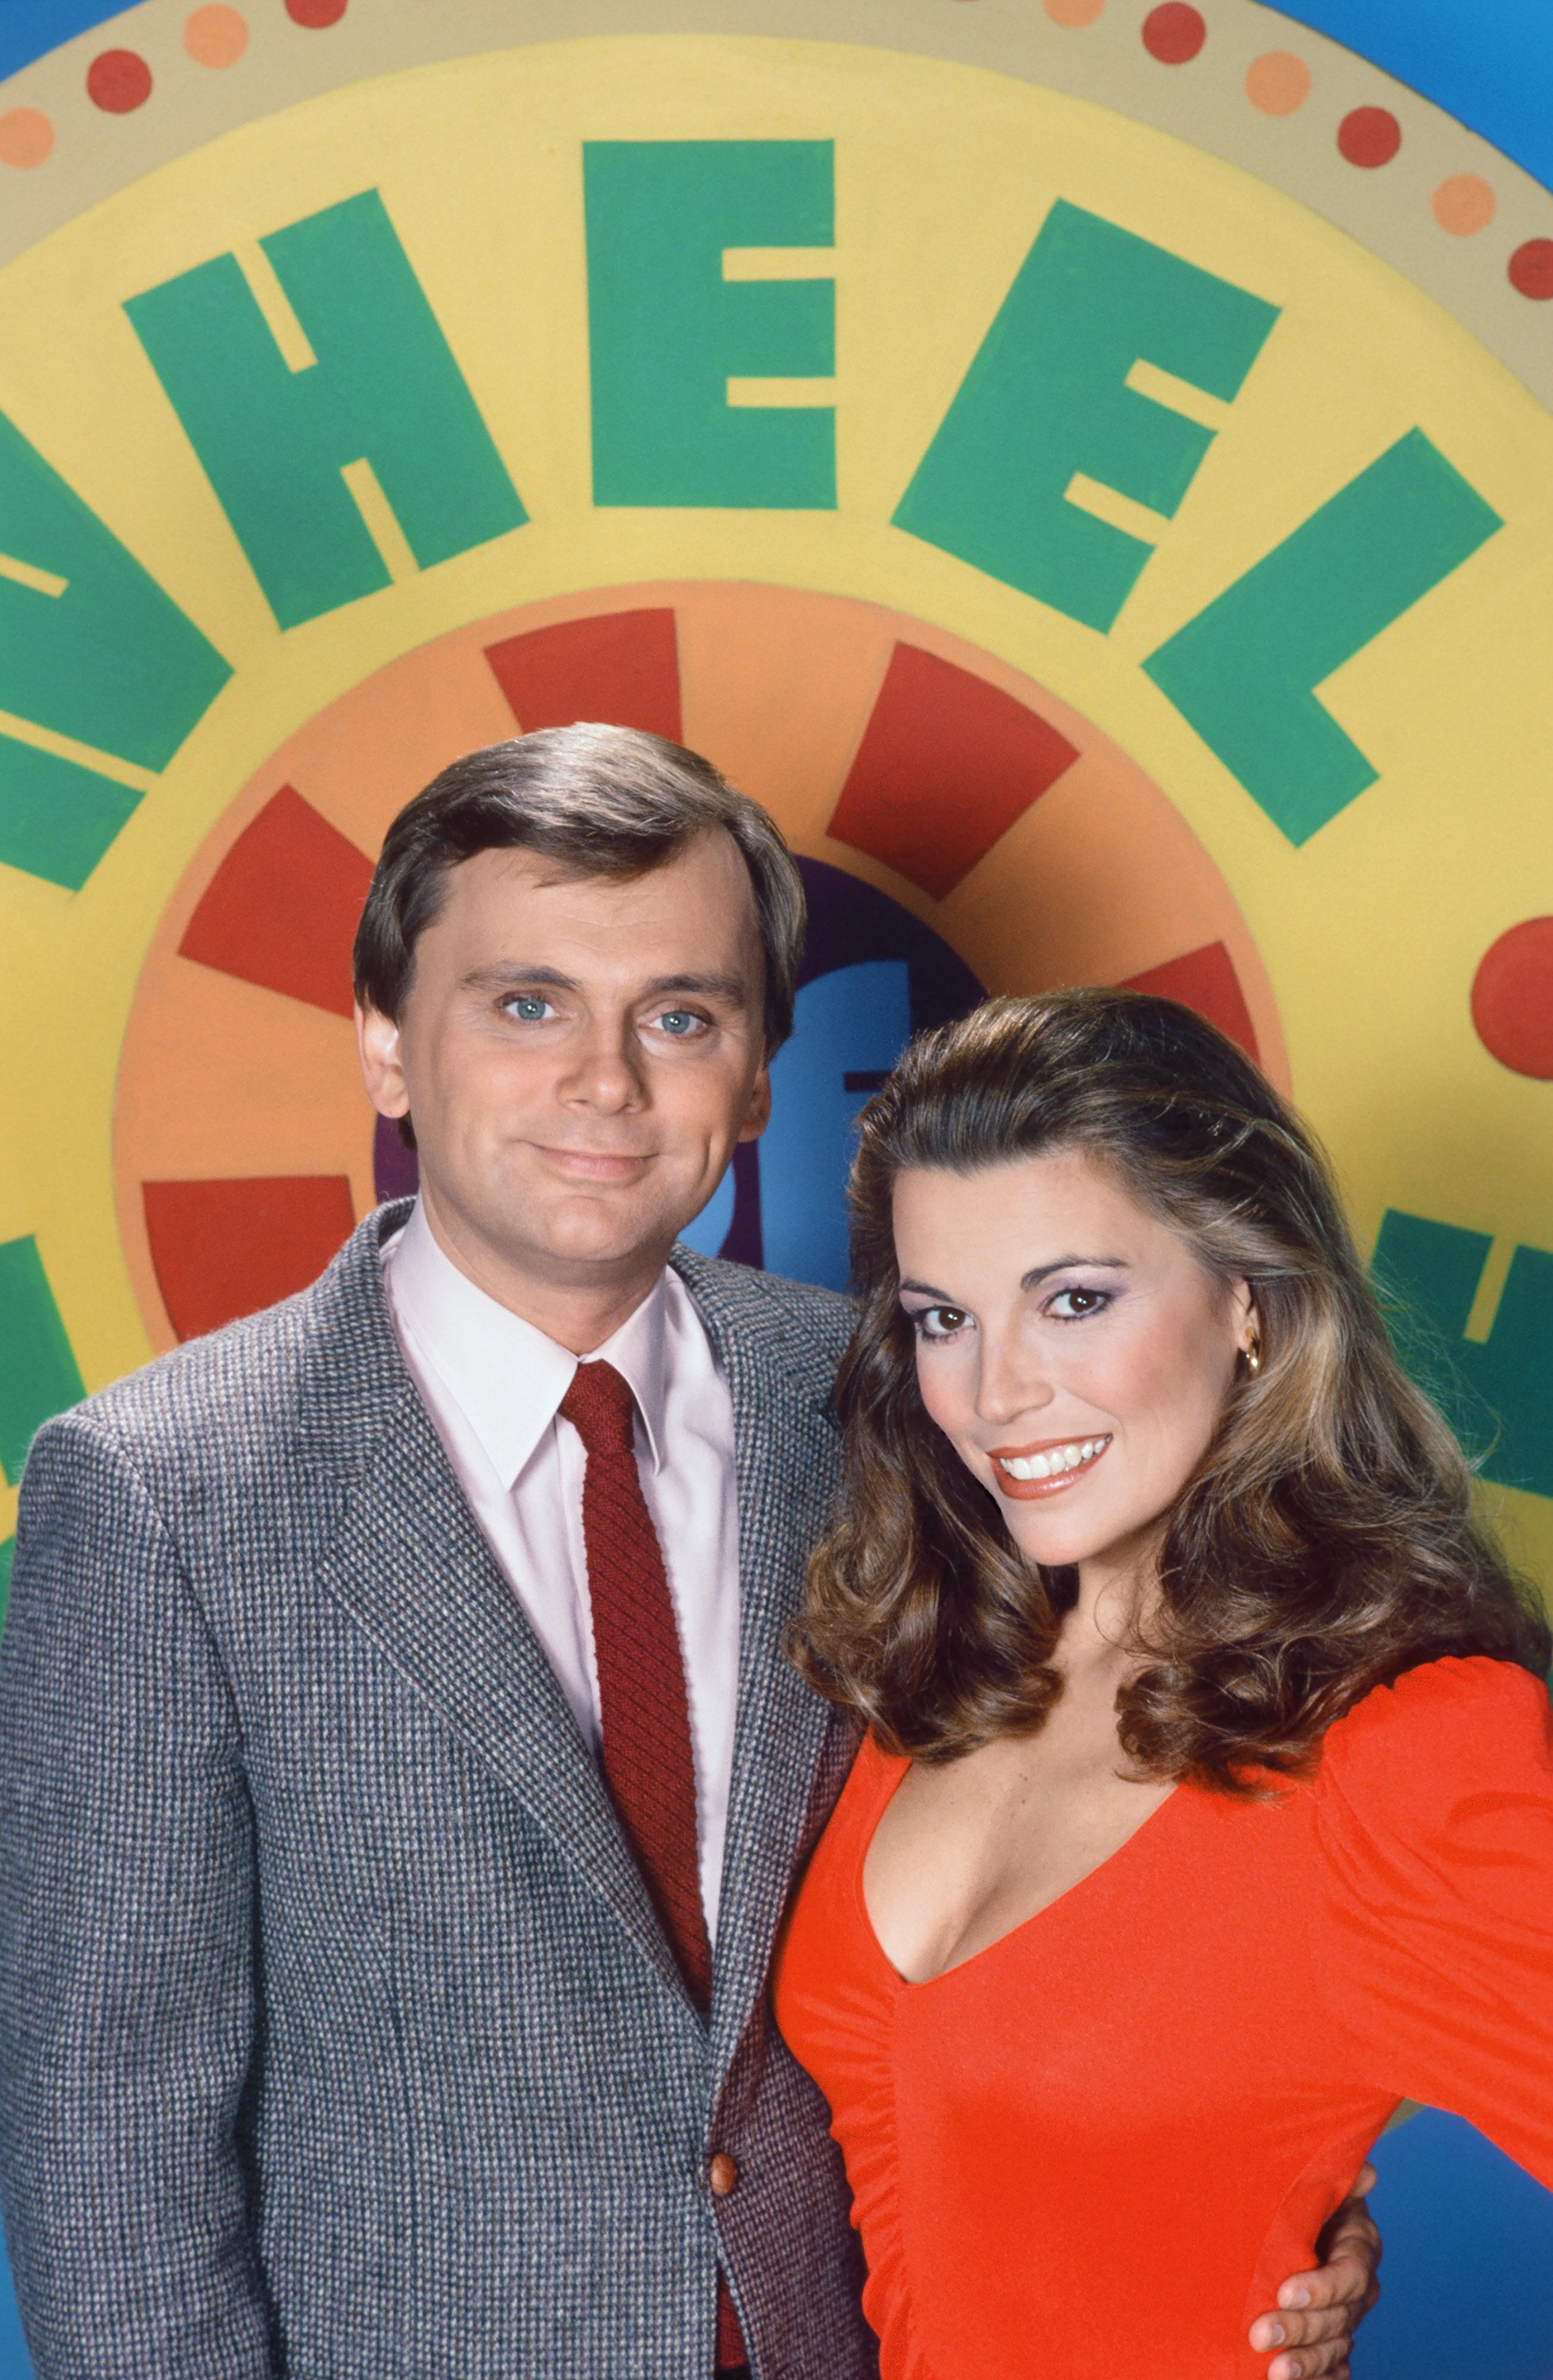 Host Pat Sajak and hostess Vanna White on "Wheel of Fortune" | Source: Getty Images